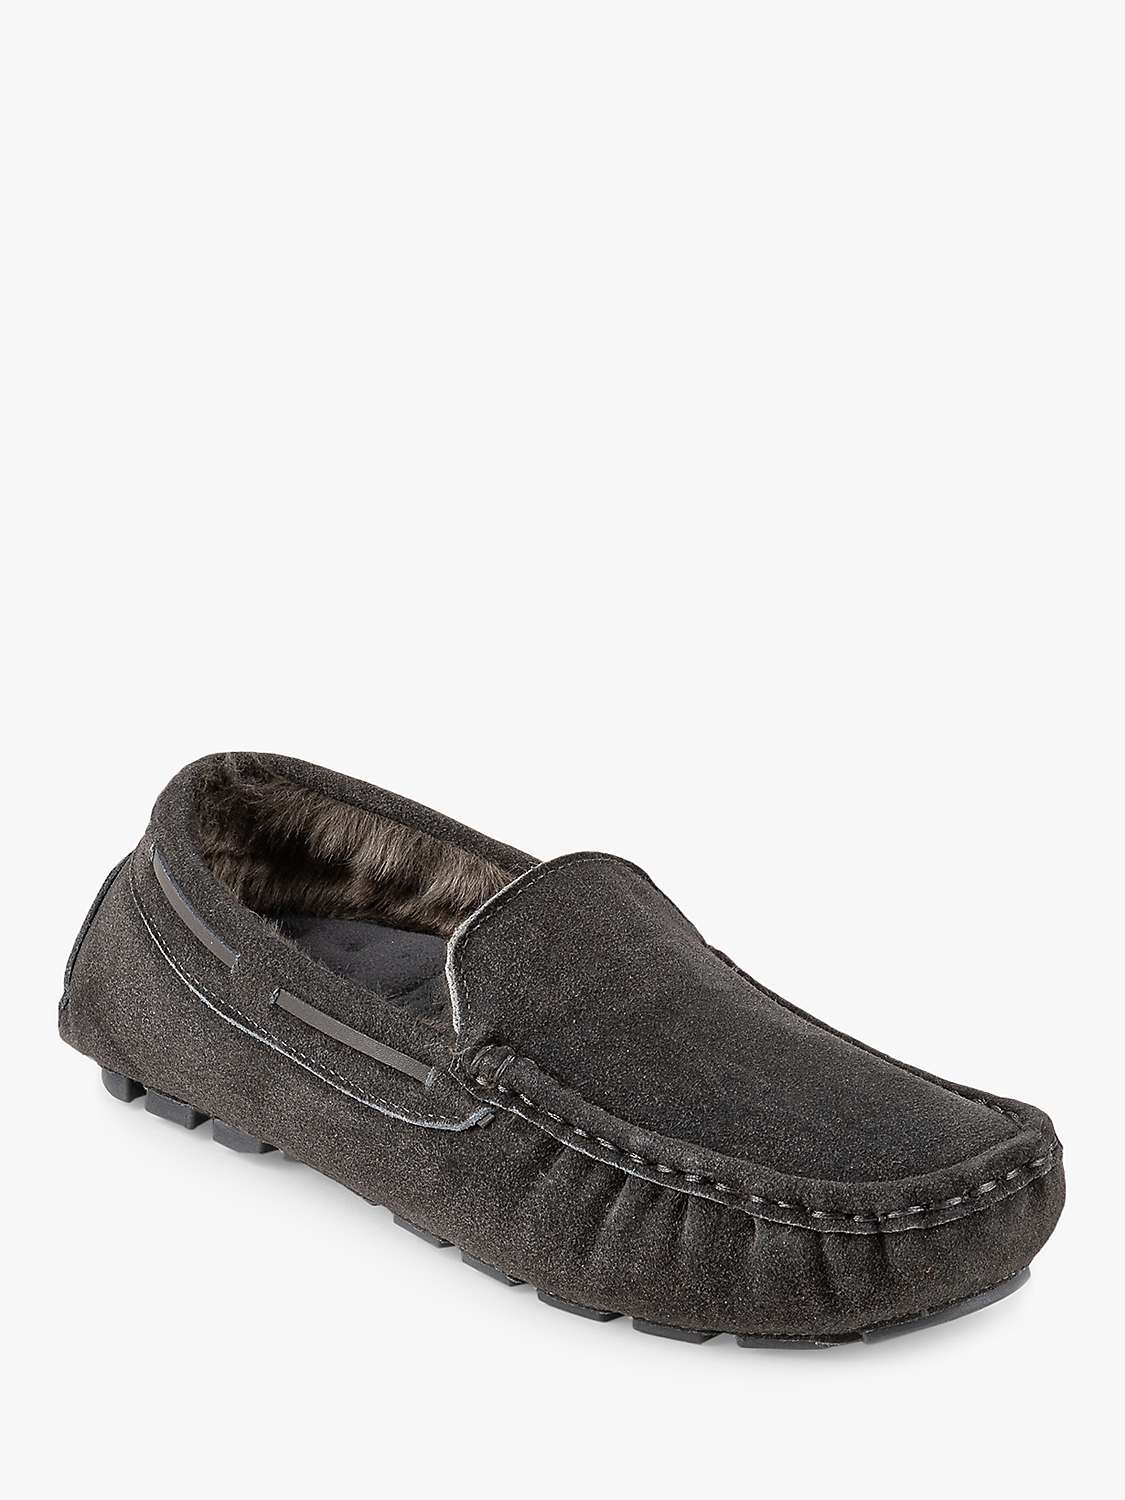 Buy totes Isotoner Suede Moccasin Slippers Online at johnlewis.com